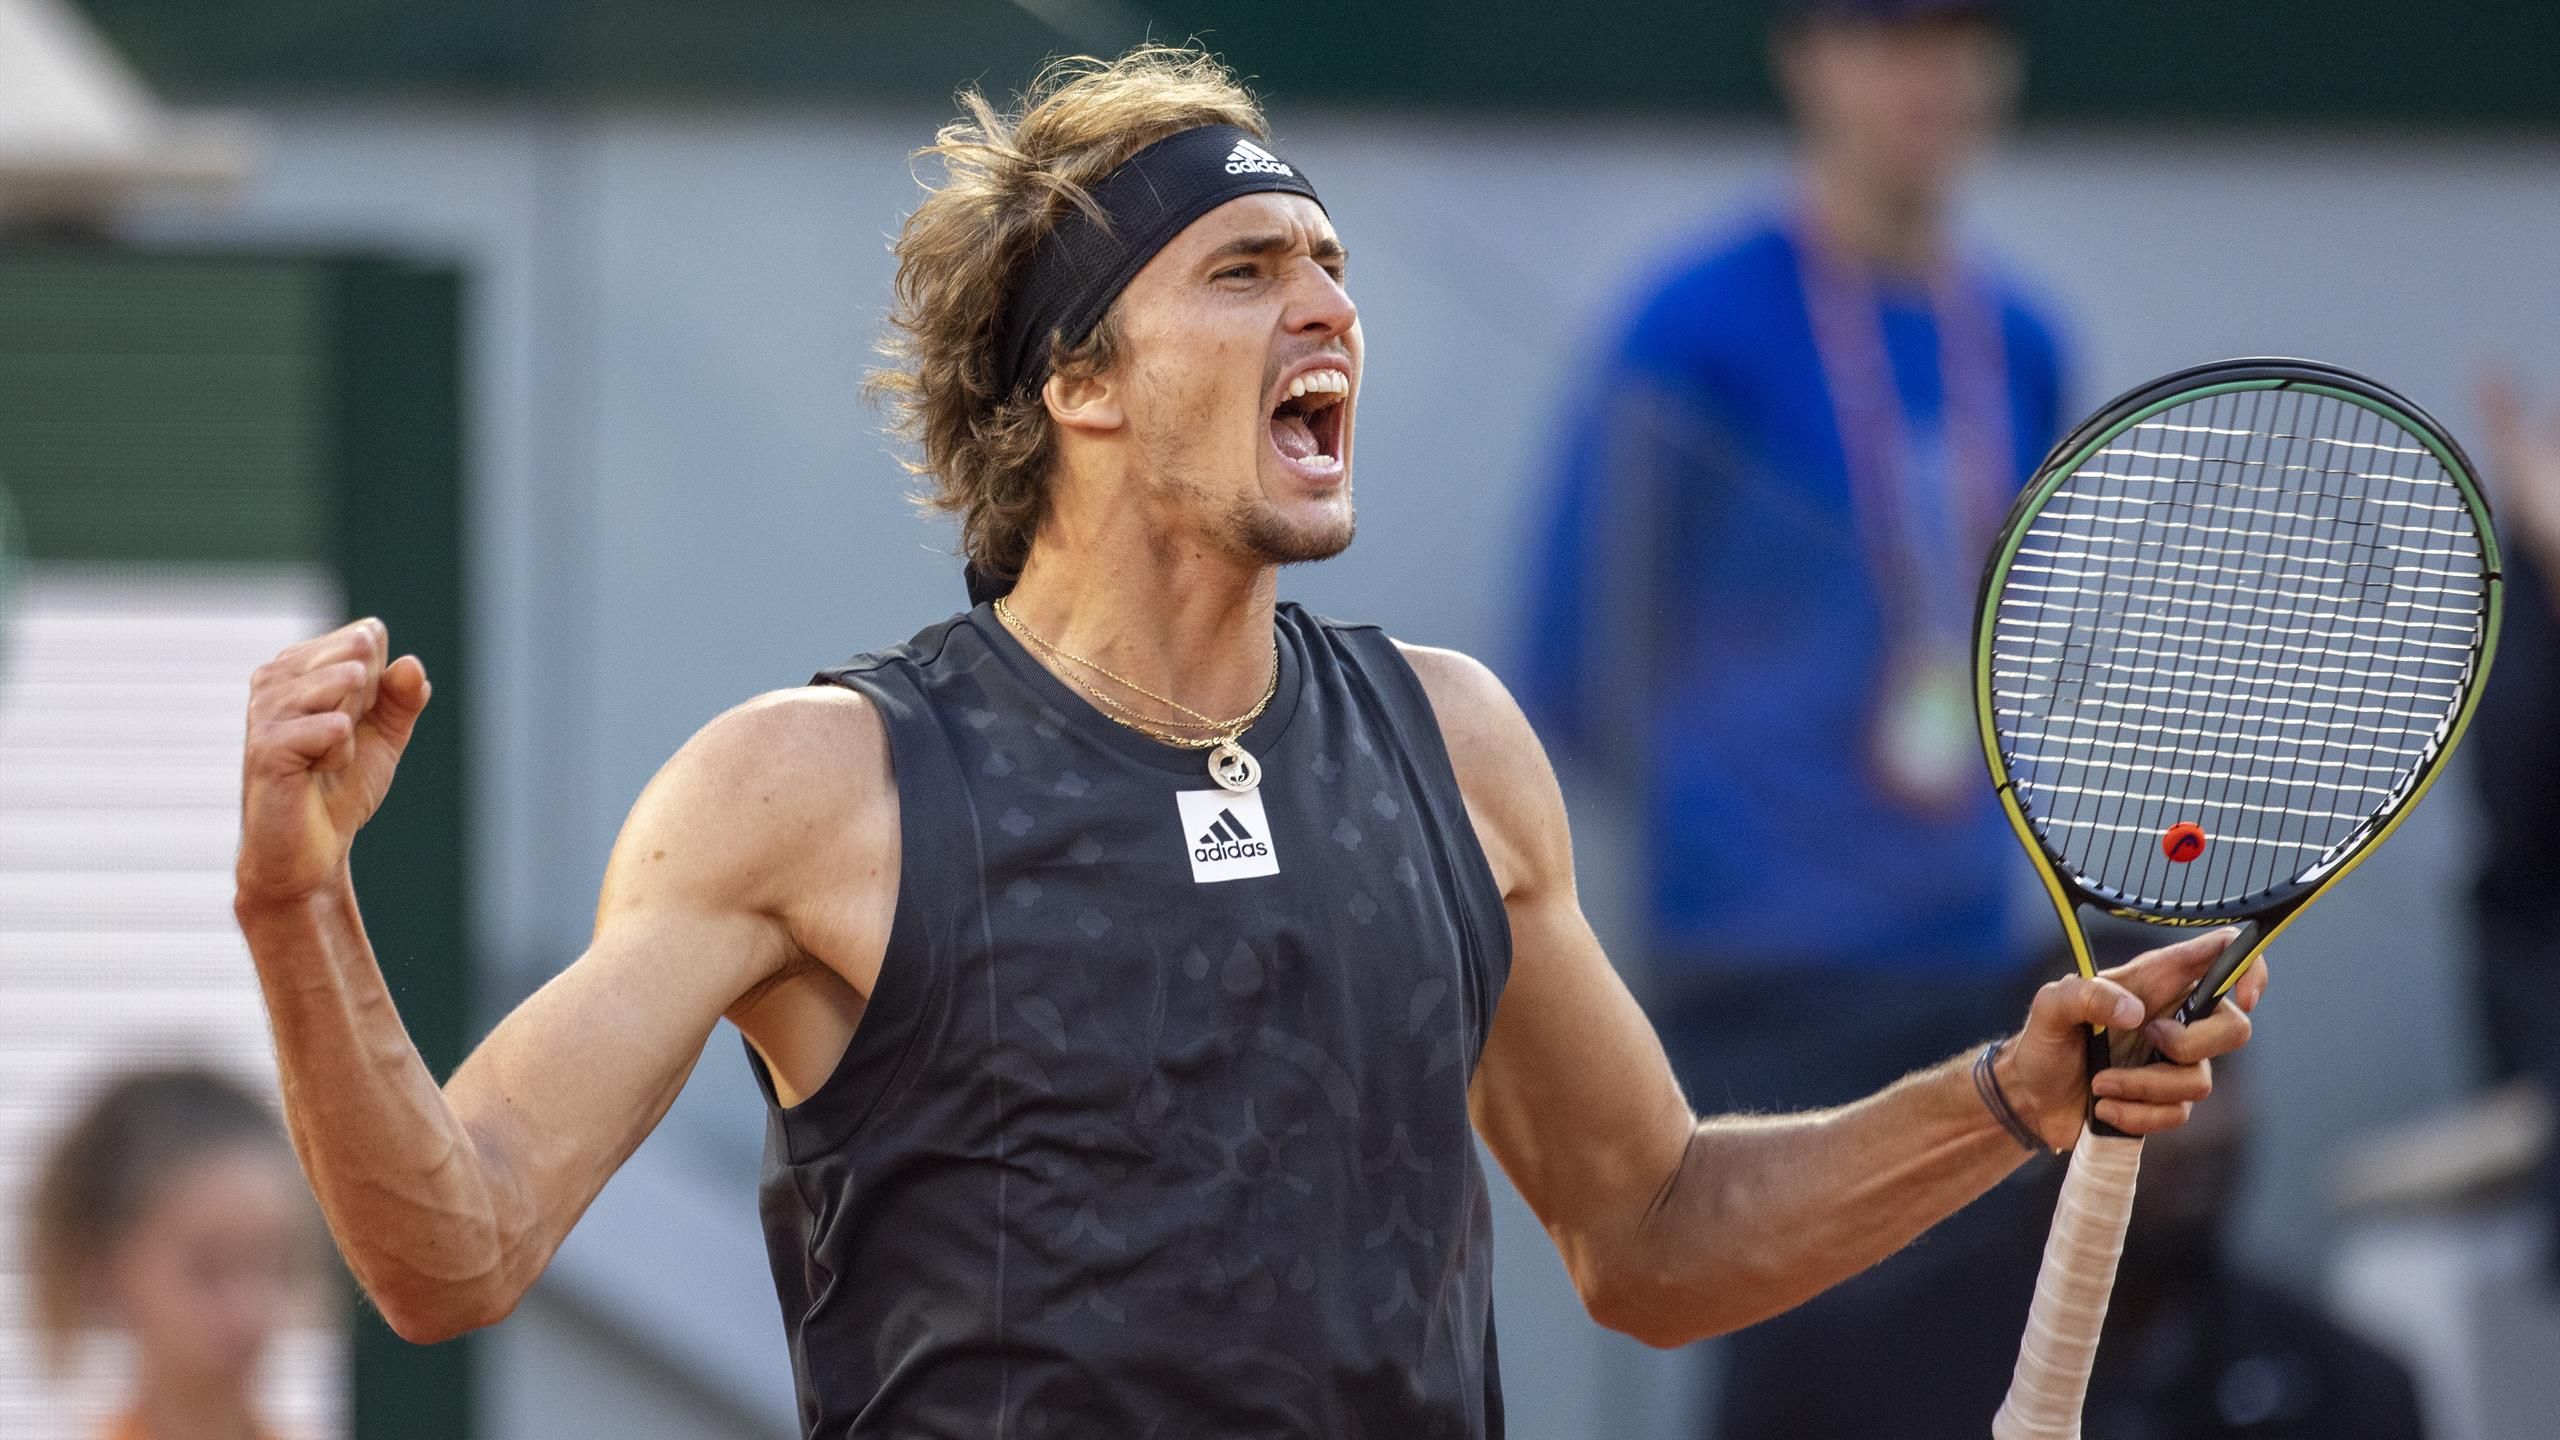 Carlos Alcarazs rise the best thing thats happened to Alexander Zverev, says John McEnroe after French Open clash